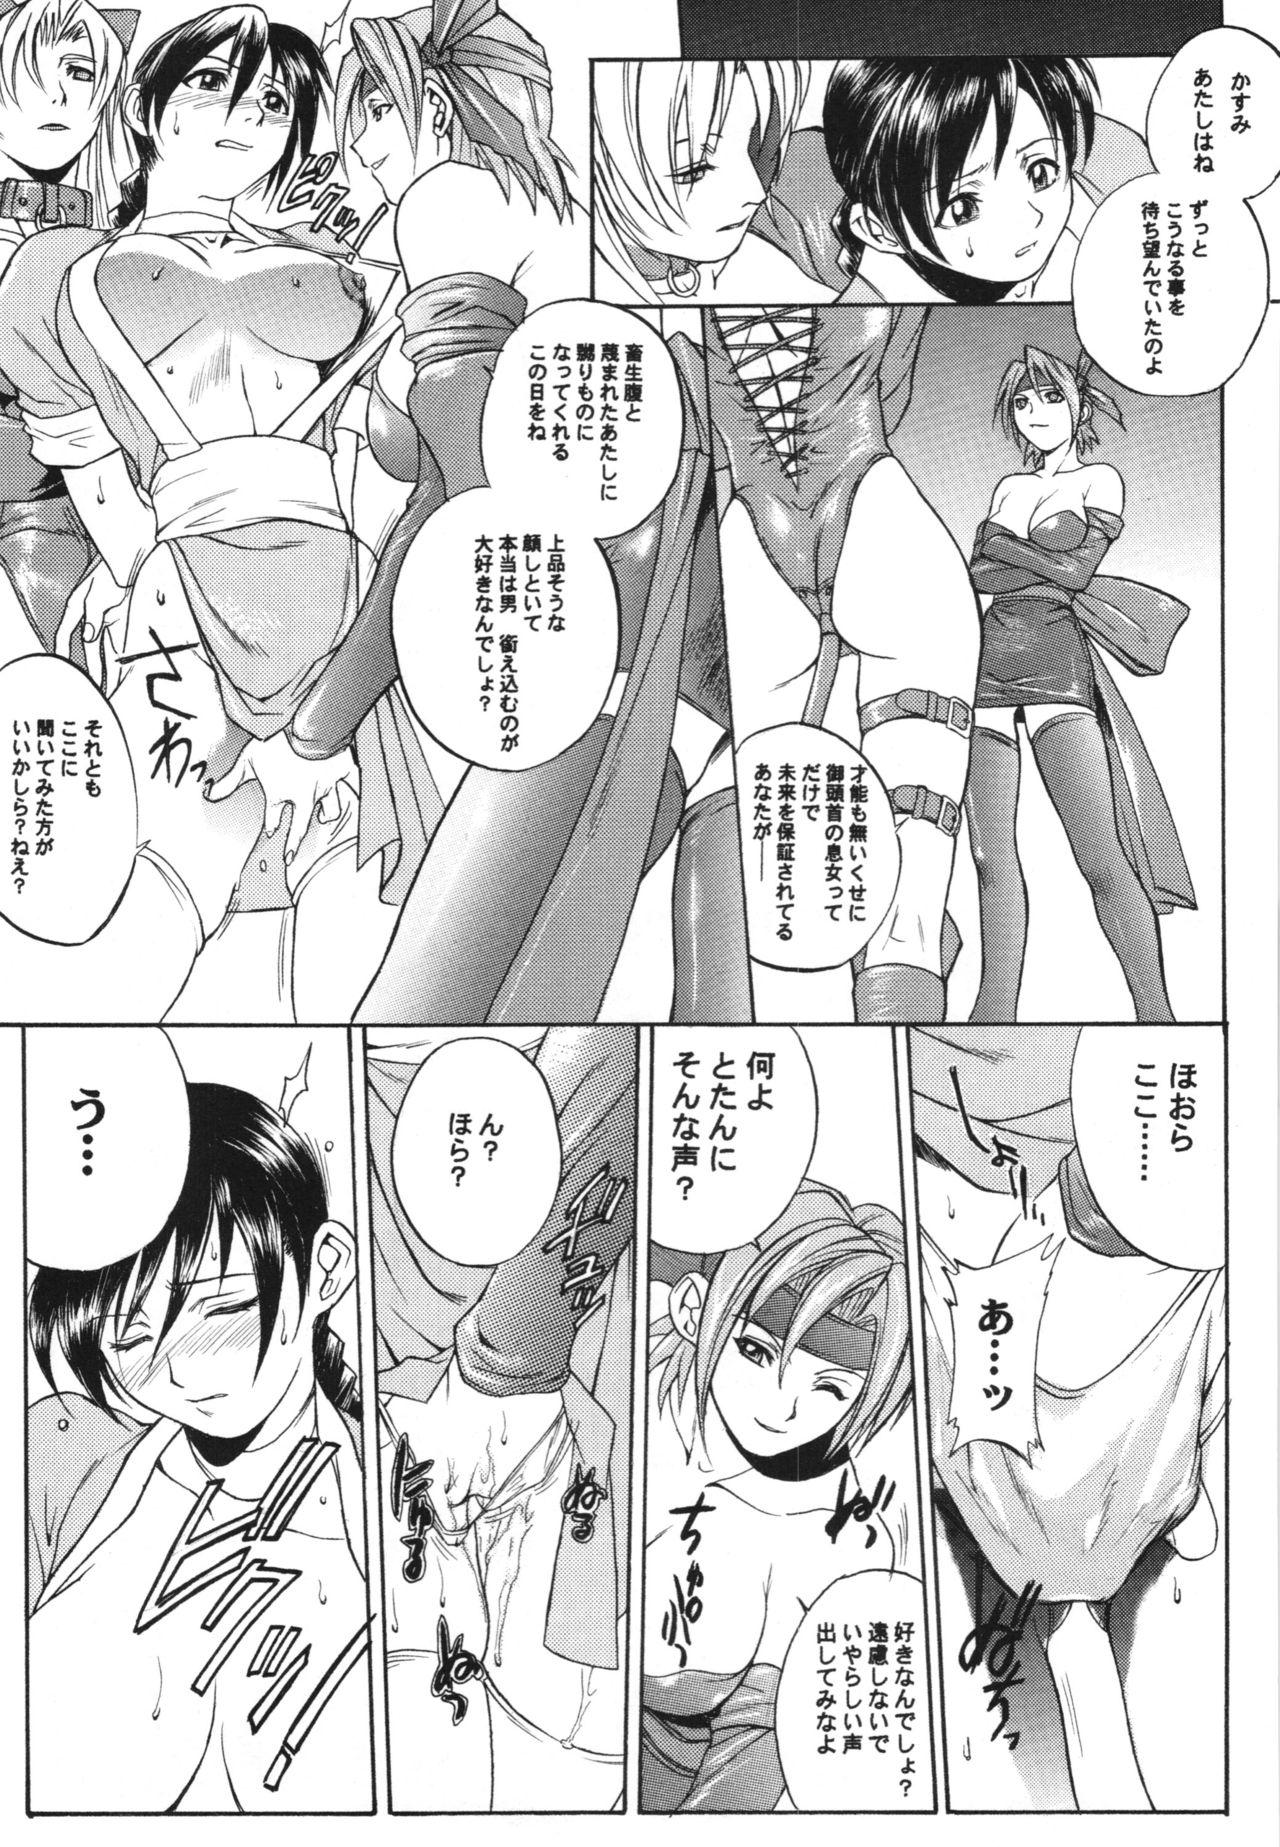 Smooth WAY OF TEX-MEX Soushuuhen 3 + Omakebon - Dead or alive To heart Xenosaga Comedor - Page 11